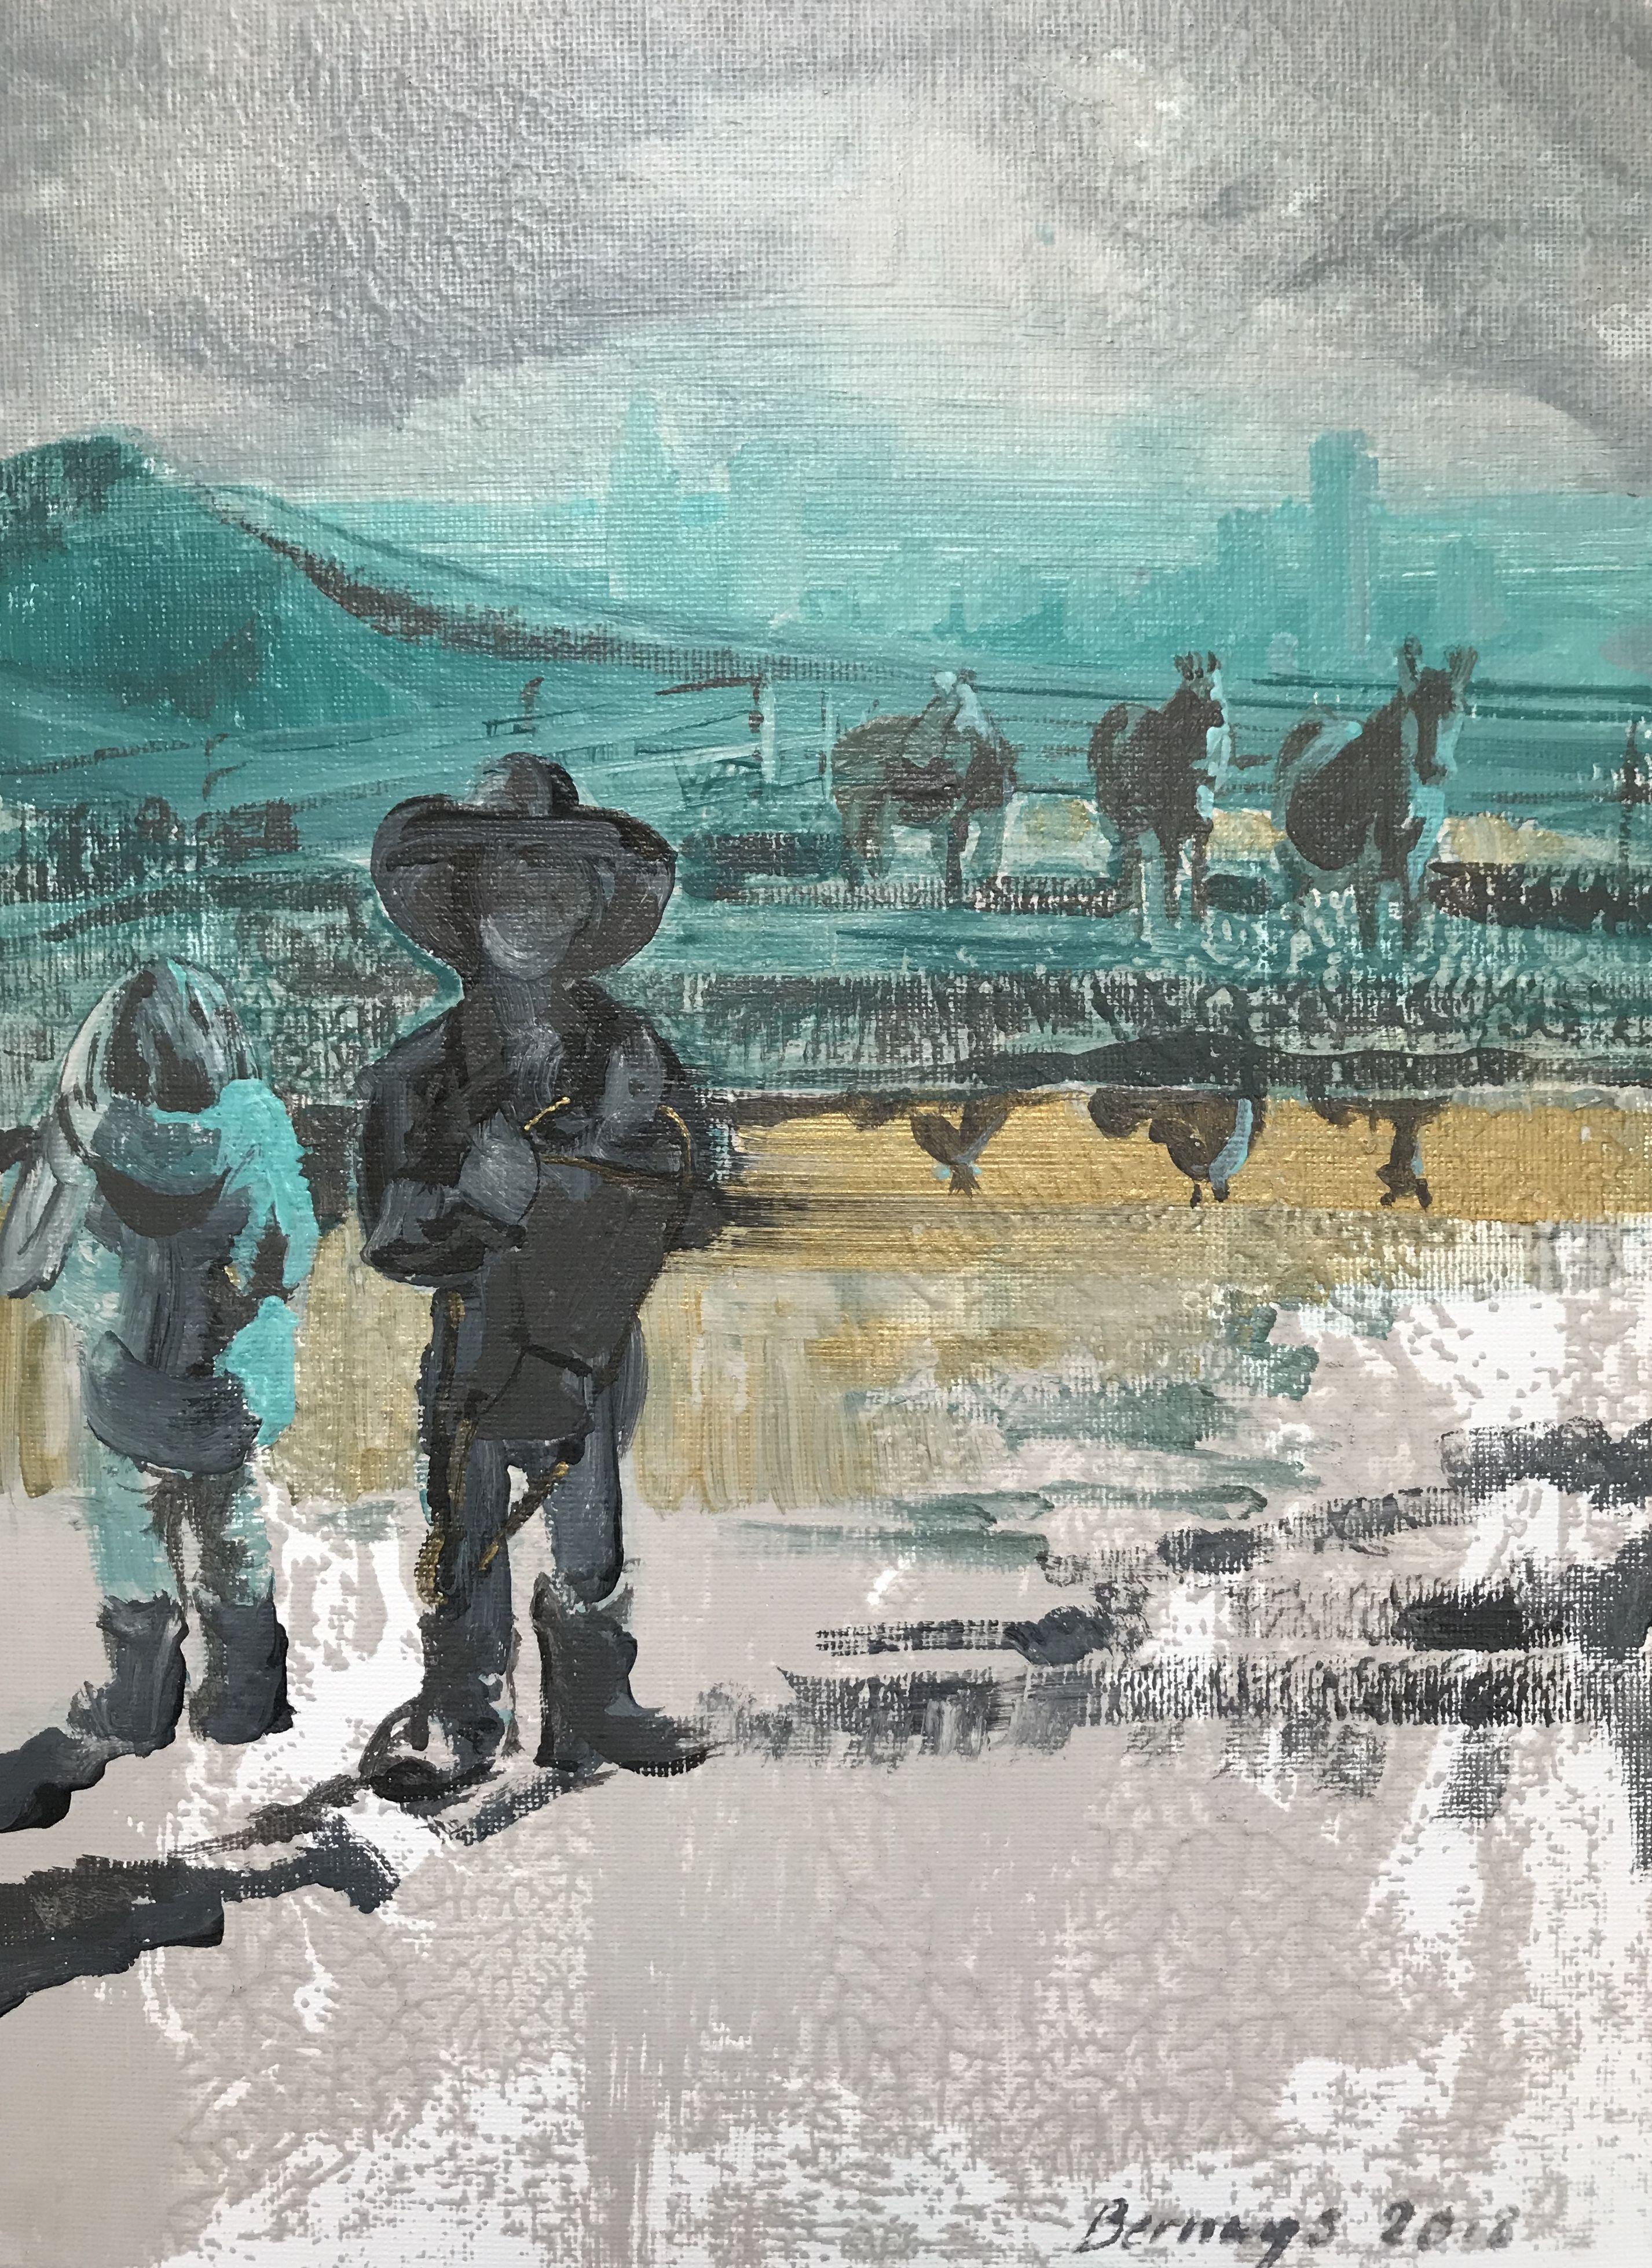 A play between opposites. I enjoyed the teal and gold, I painting the contemporary LA downtown skyline, boarded by the rural hills and horses in the foreground. The rough of the paint and mud; the smooth of the reflection. The boy and girl, facing